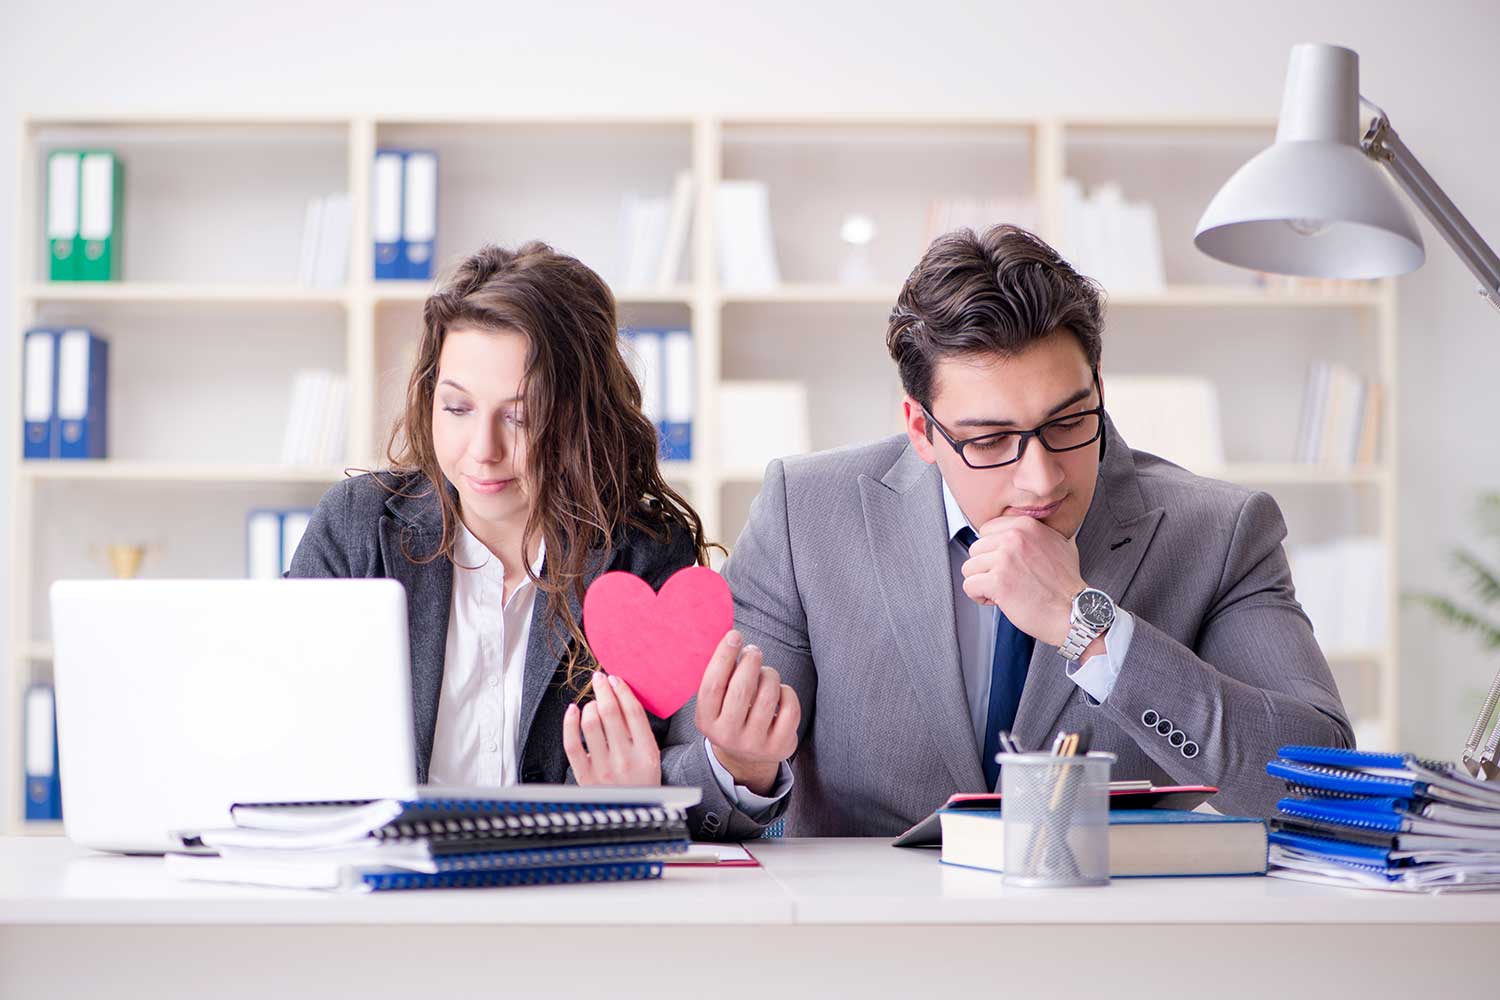 A man and a woman are shown seated, one looking at a laptop, the other at a sheet of paper. They are holding a red paper heart.